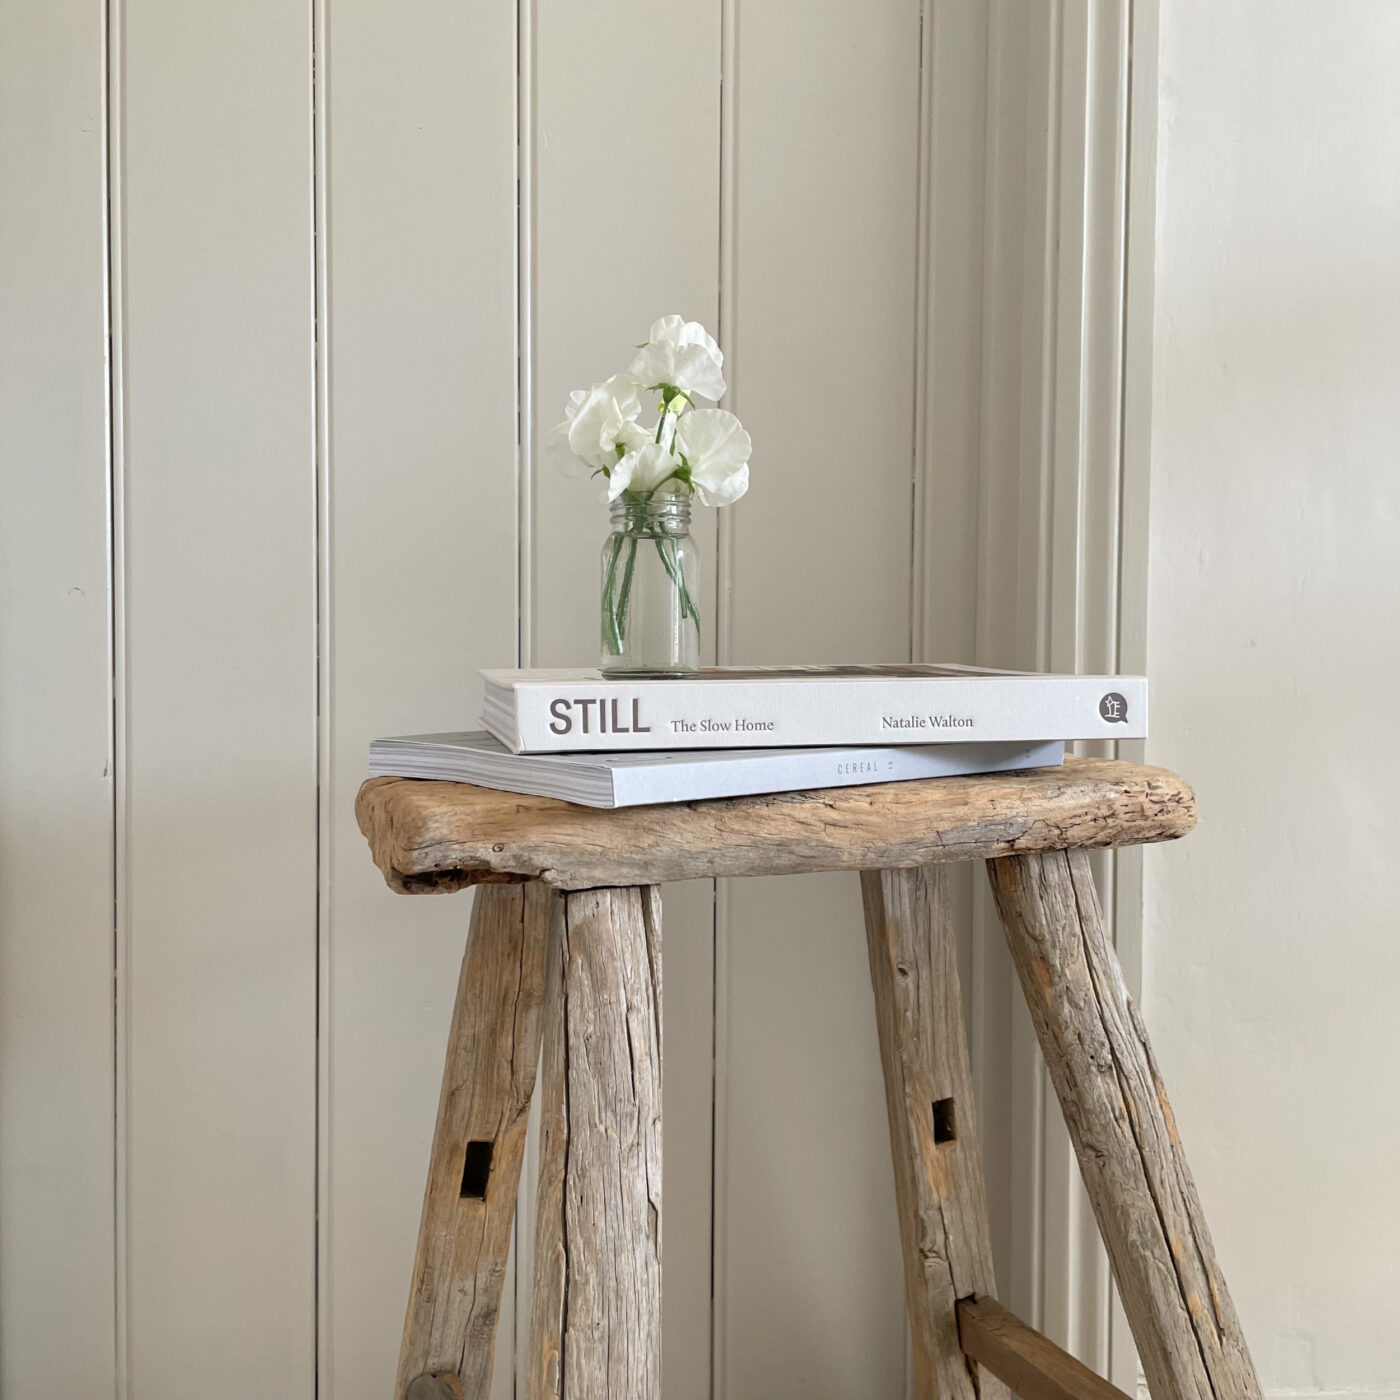 Our Favourite Coffee Table Books on Interior Design